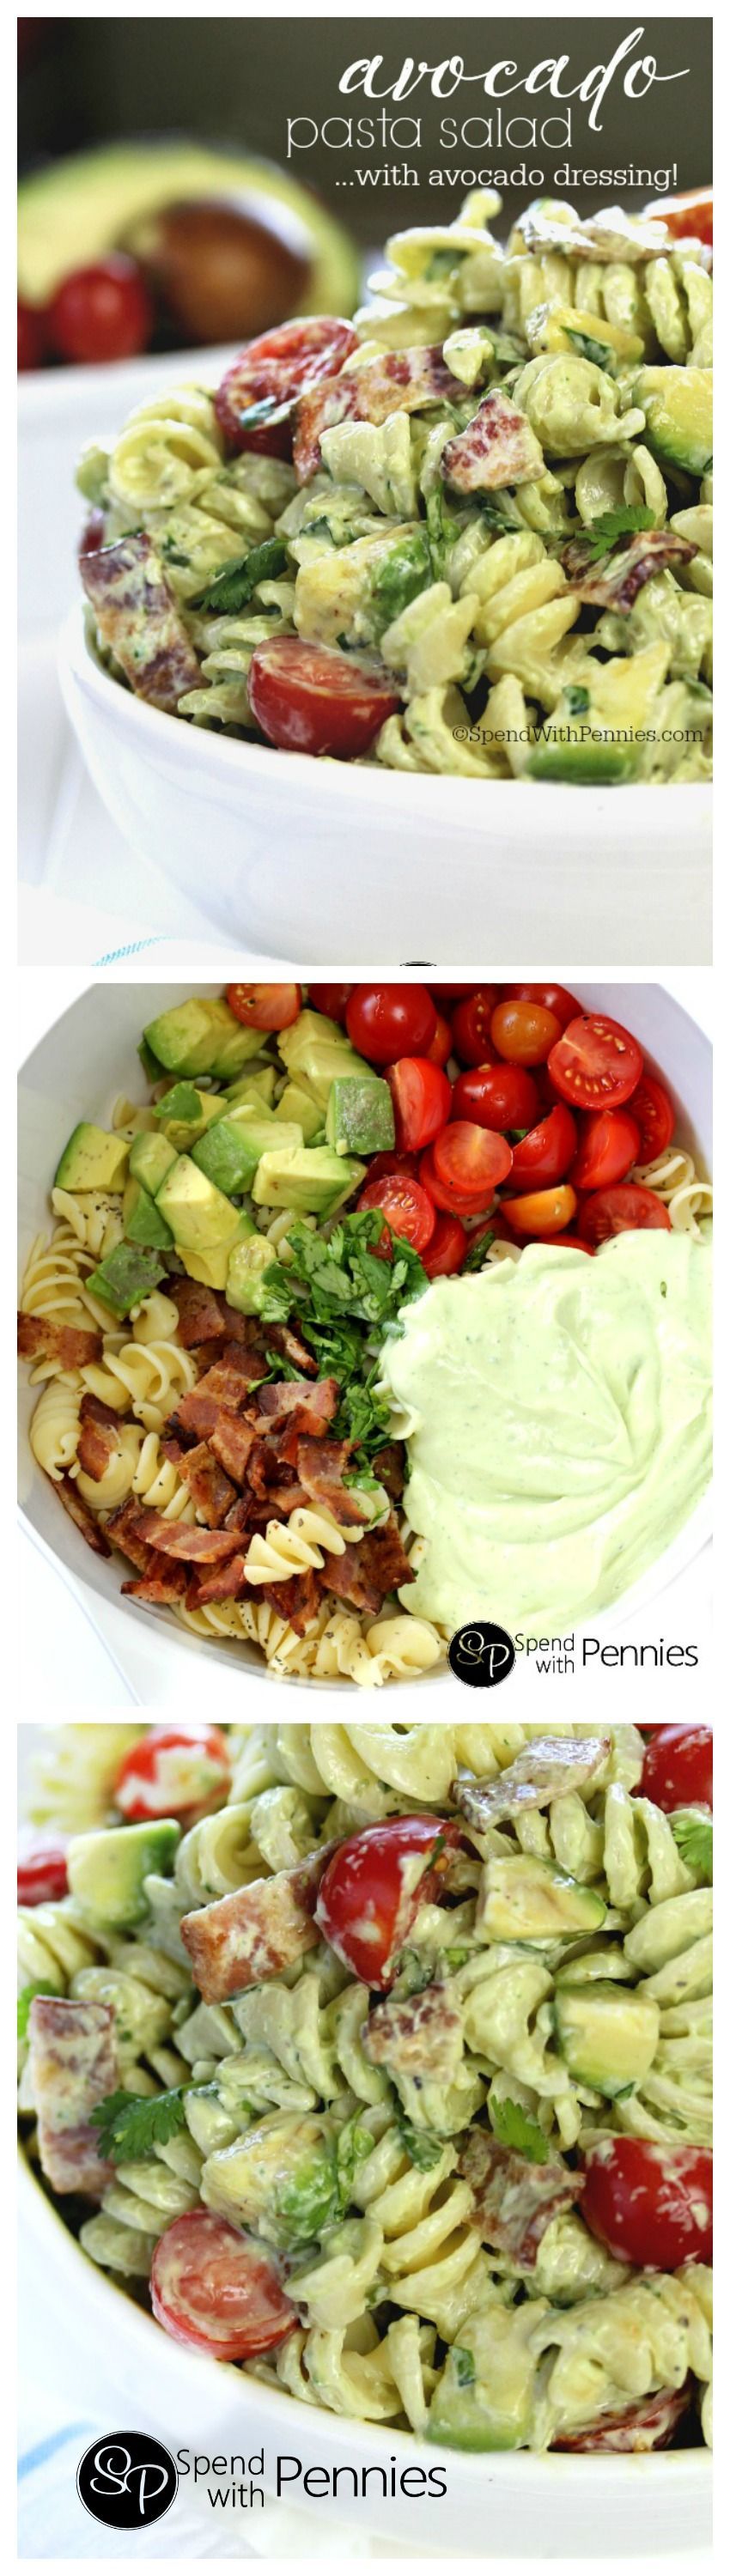 Cold pasta salads are the perfect & satisfying quick dinner or lunch! This delicious pasta salad recipe is loaded with avocados,